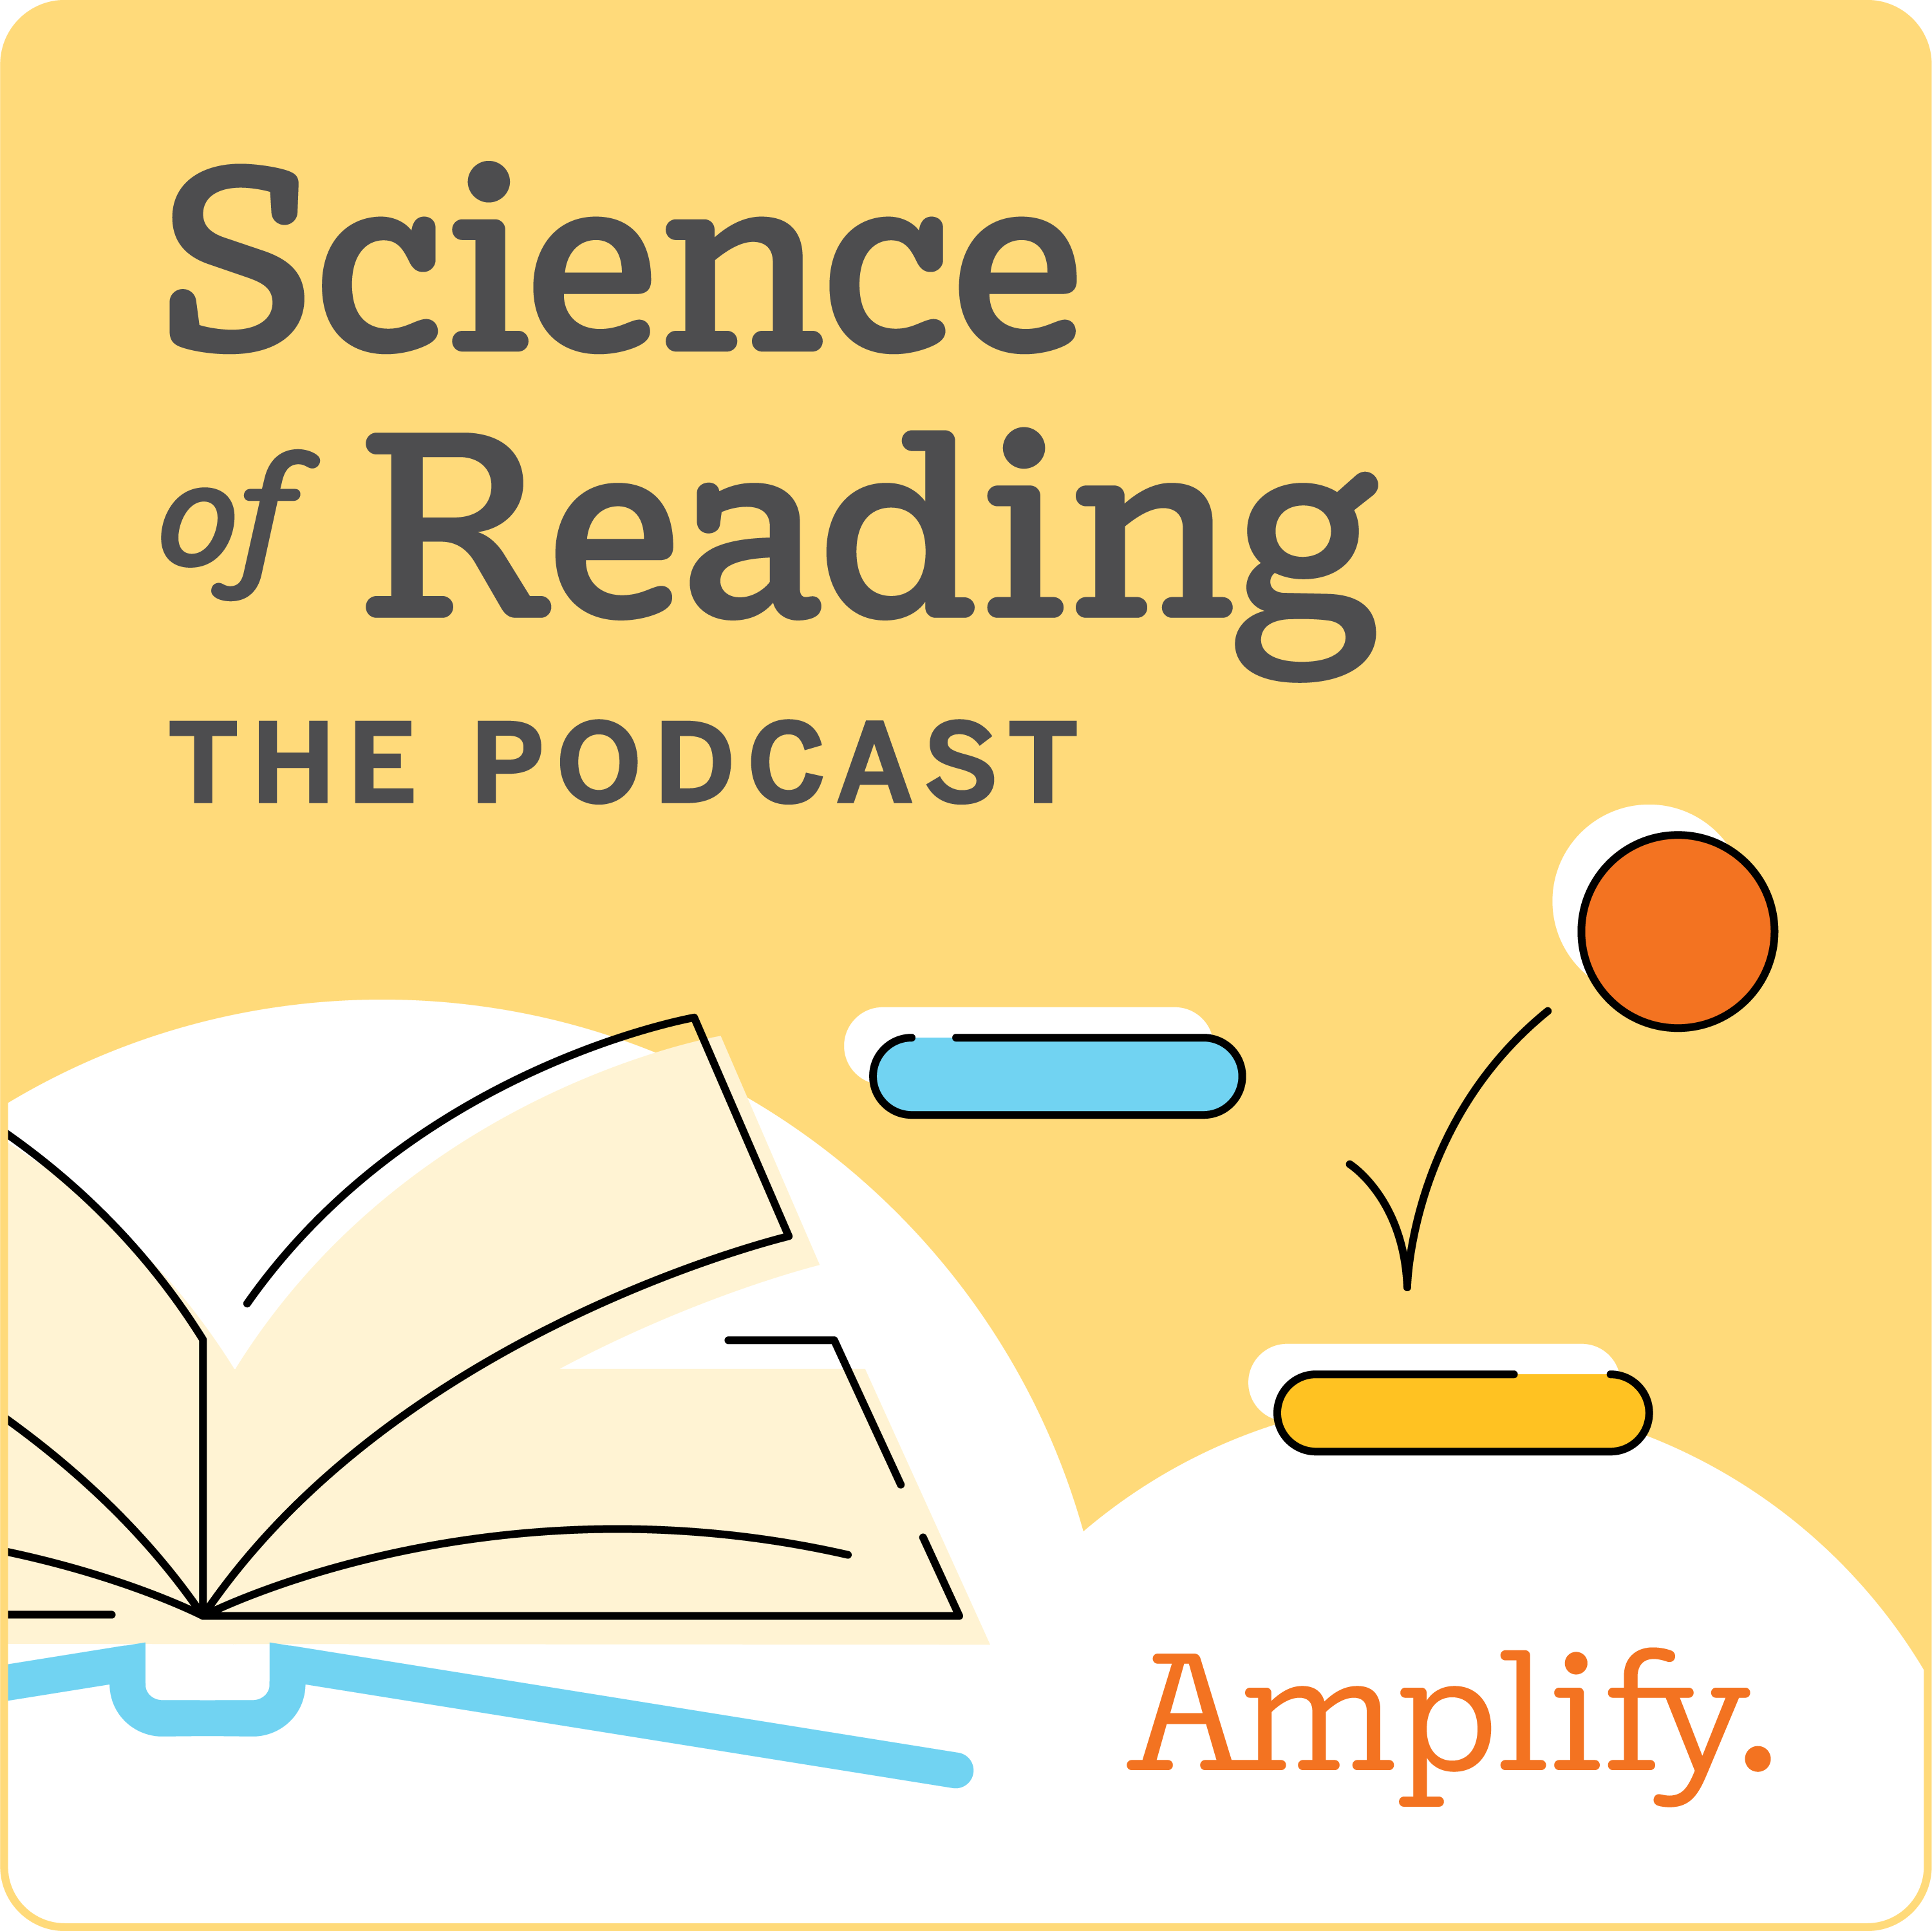 Science of Reading podcast cover image open book